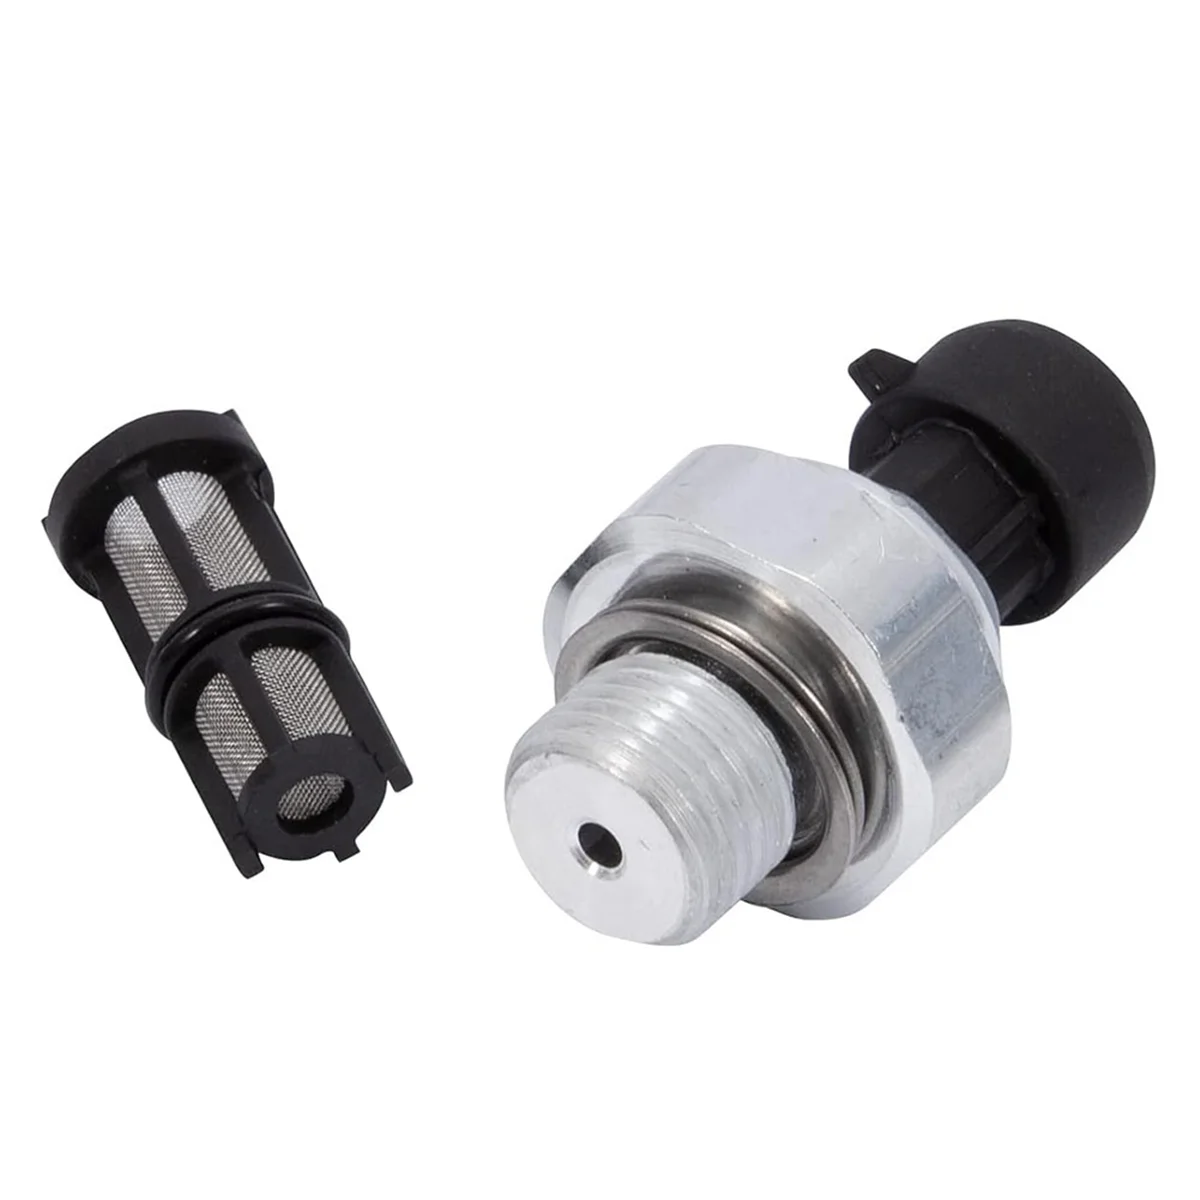 

12677836 Oil Pressure Sensor Switch/with Screen Filter D1846, Engine Oil Pressure Sensor with Filter 917-143